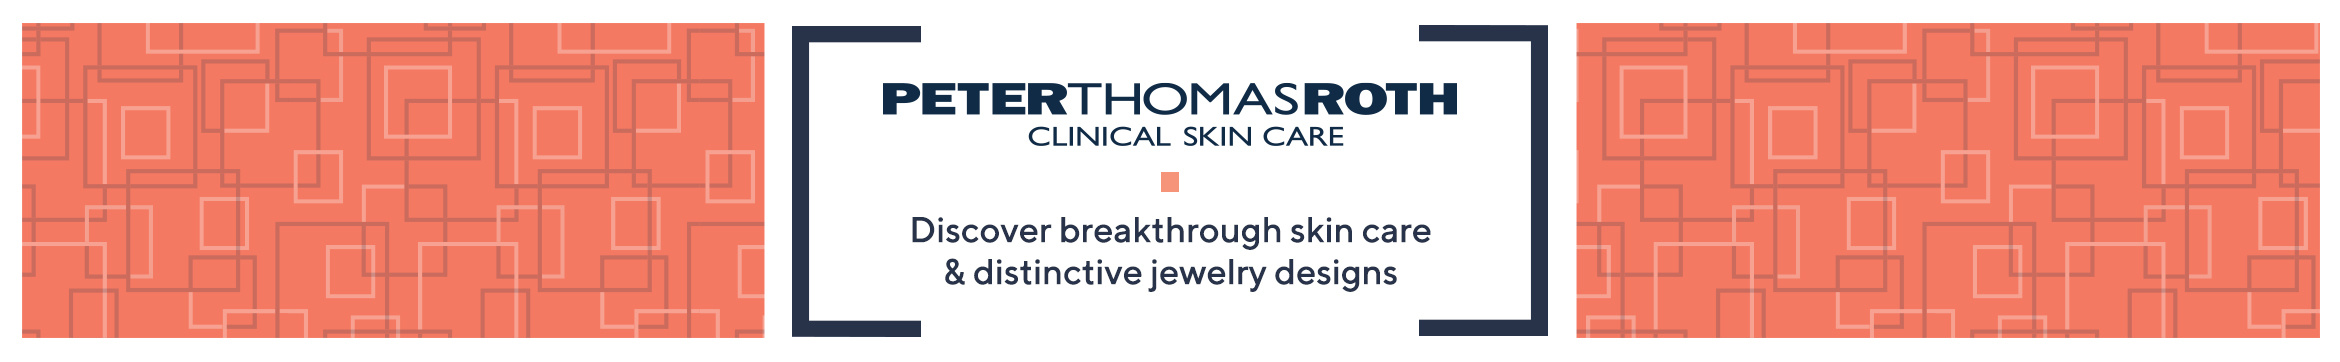 Peter Thomas Roth. Discover breakthrough skin care & distinctive jewelry designs